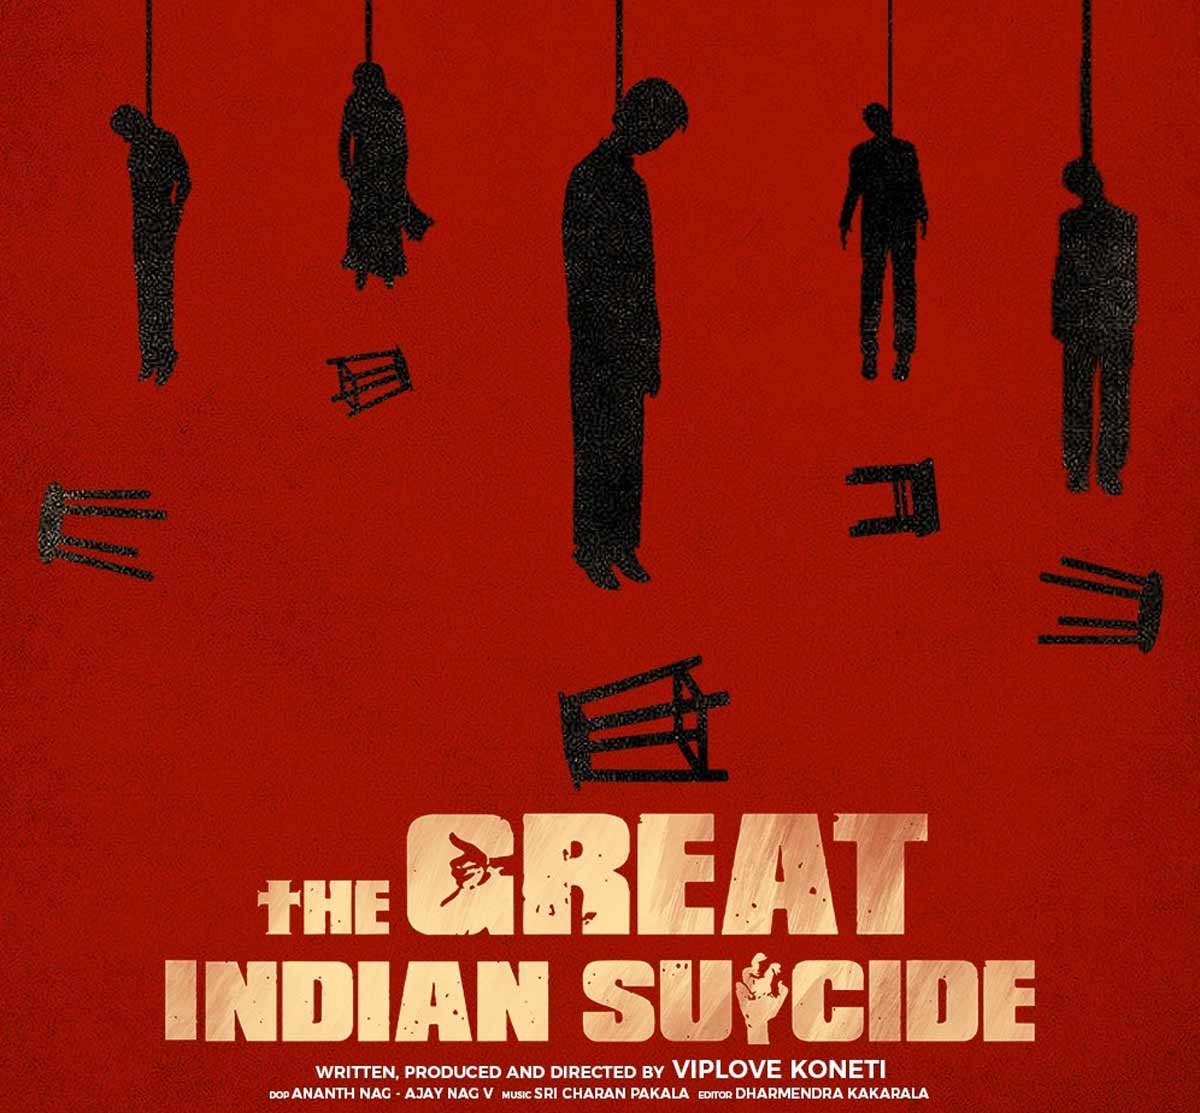 The Great Indian Suicide Movie Review